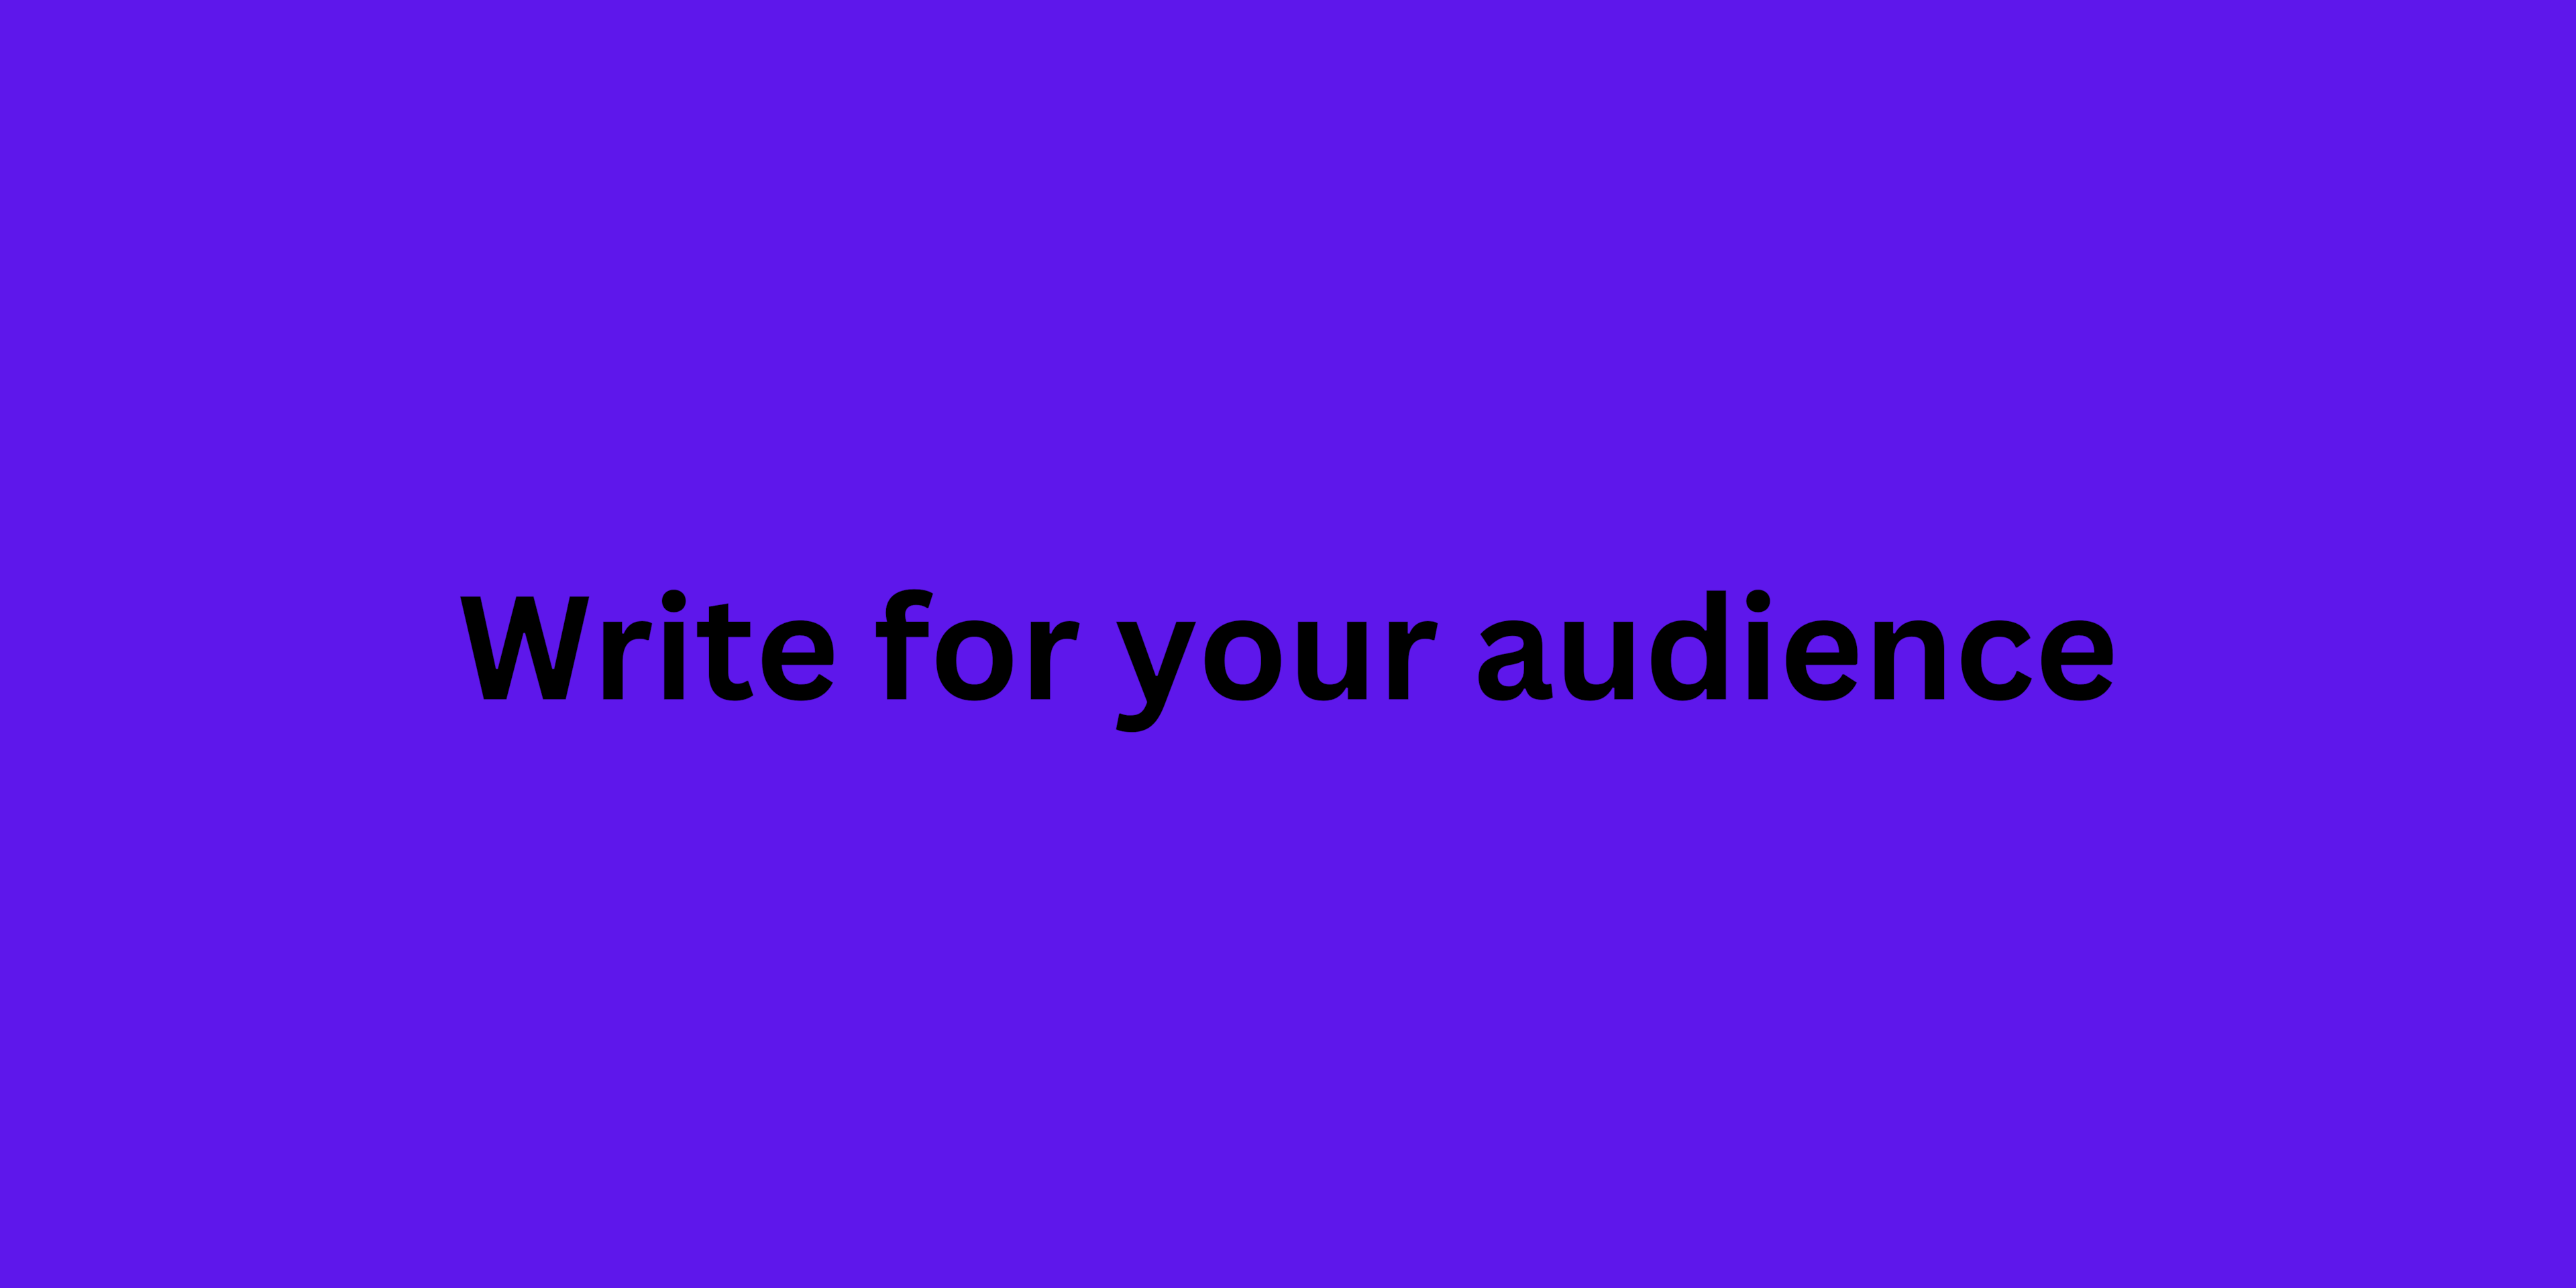 Write for your audience